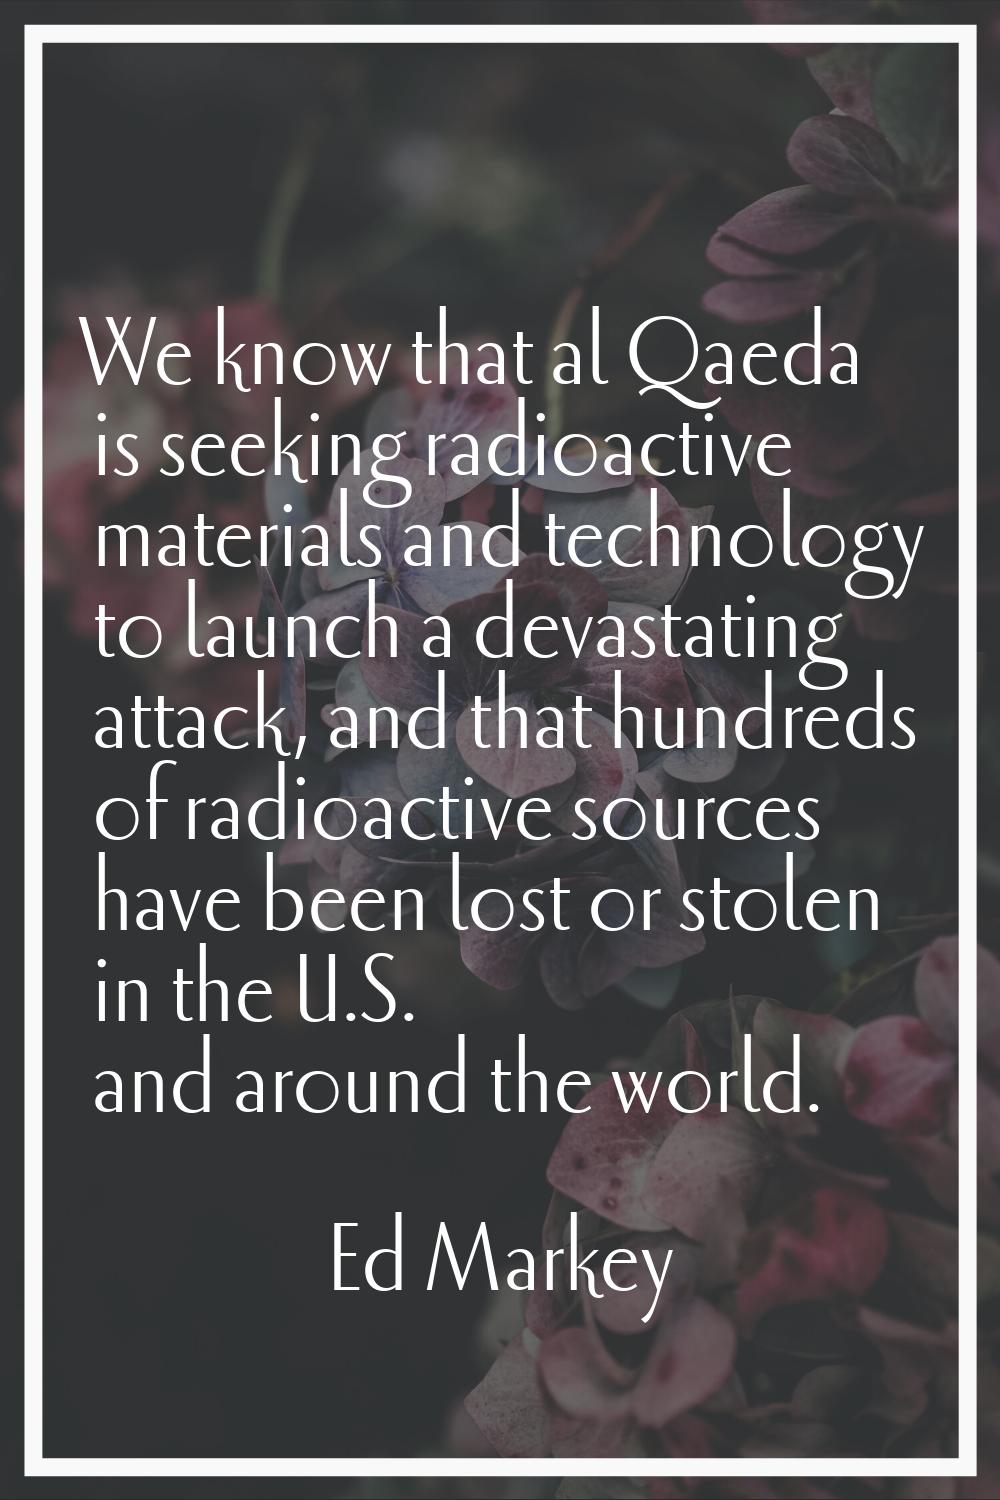 We know that al Qaeda is seeking radioactive materials and technology to launch a devastating attac